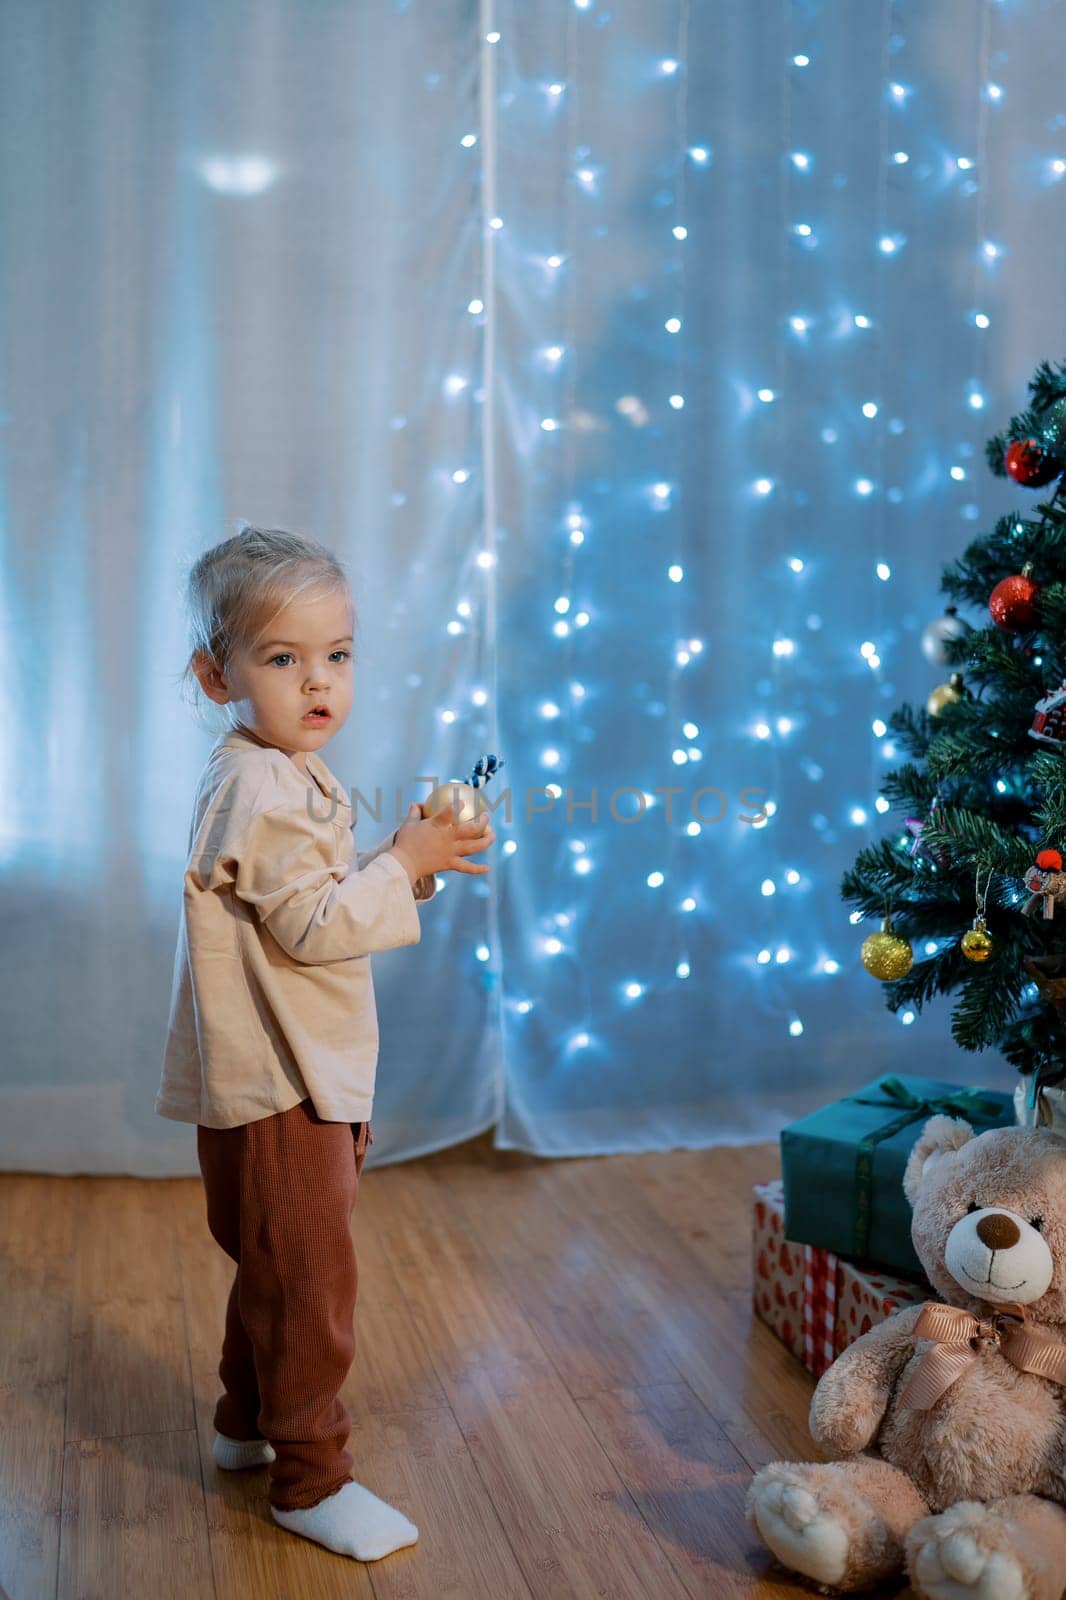 Little girl stands near a decorated Christmas tree with a ball in her hands by Nadtochiy